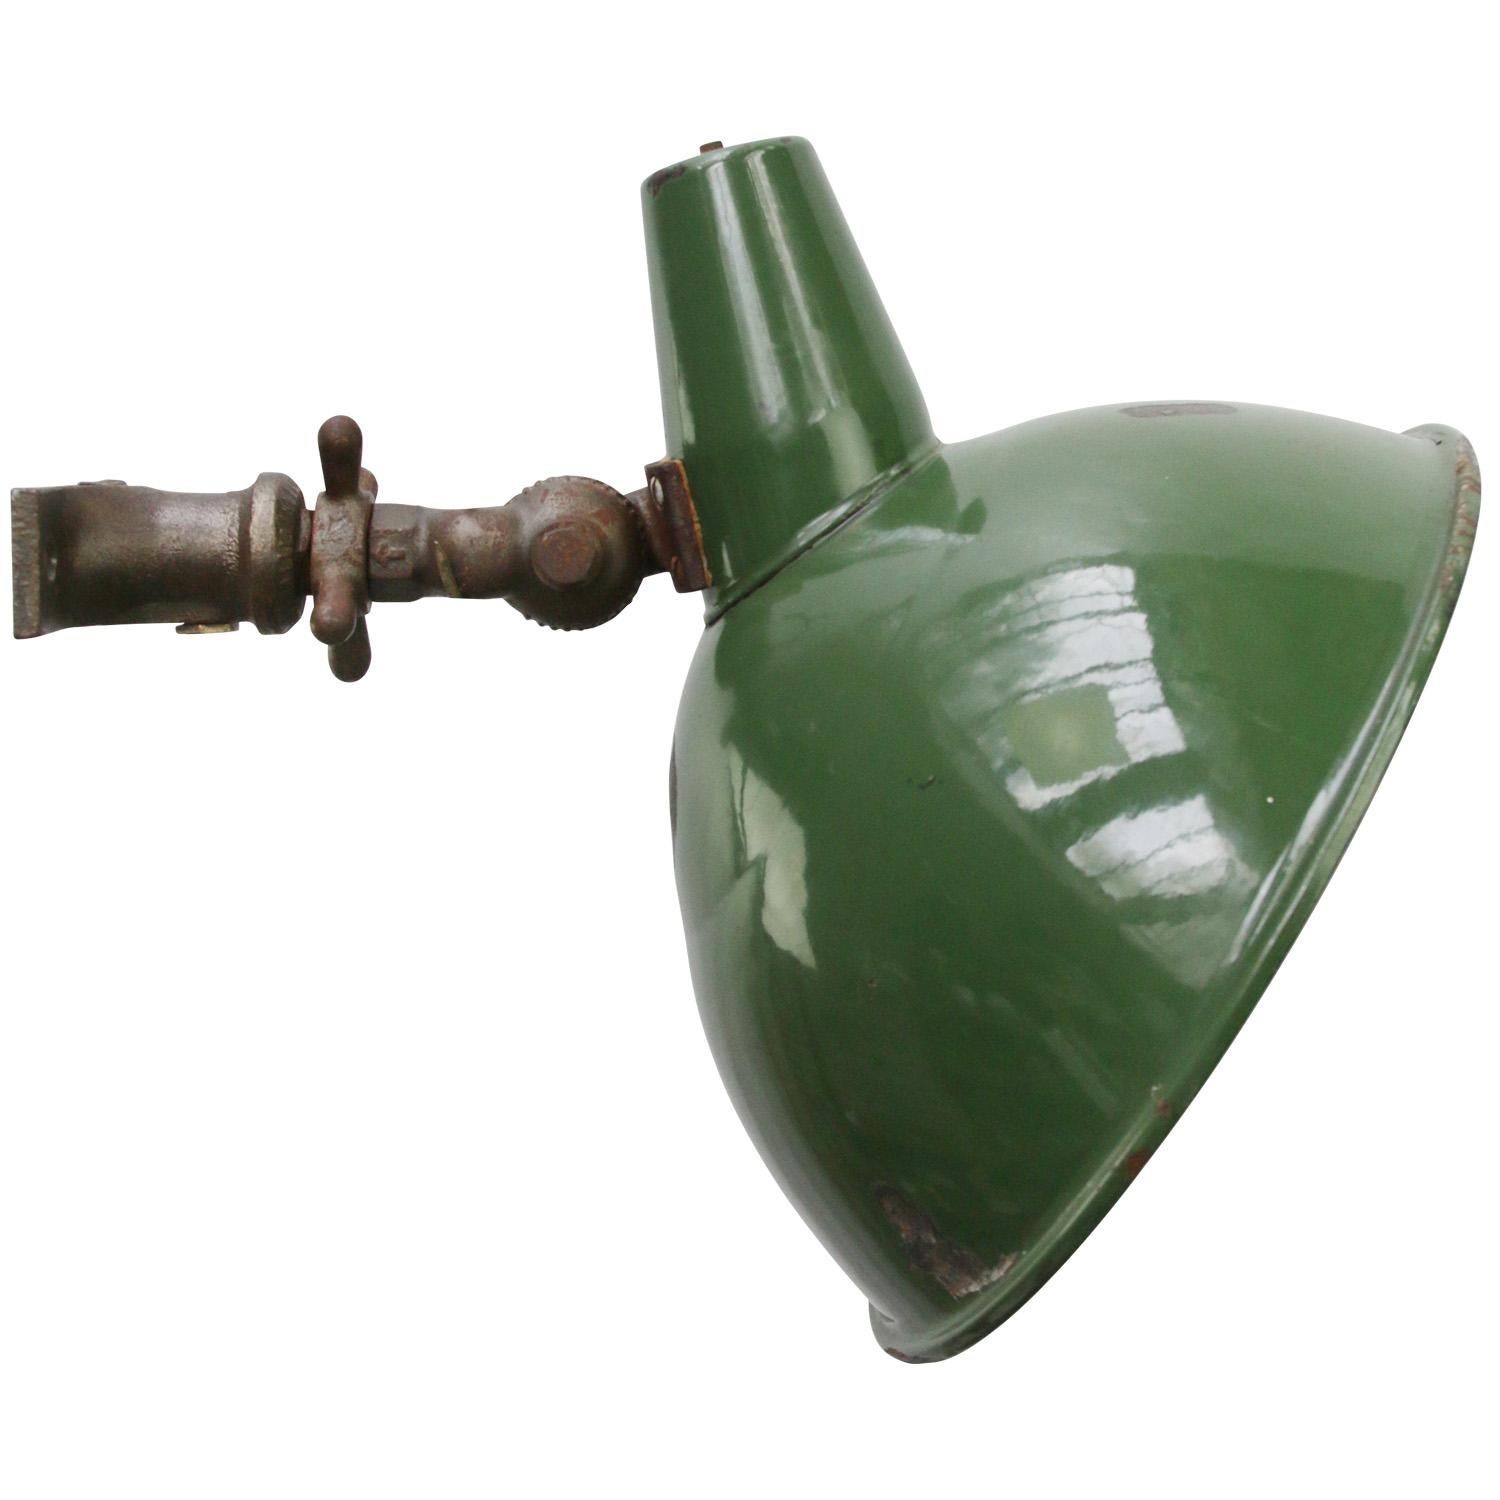 French industrial wall light.
Cast iron wall pieces with green enamel shade.

Size wall mount 15 × 5 cm

Weight: 4.30 kg / 9.5 lb

Priced per individual item. All lamps have been made suitable by international standards for incandescent light